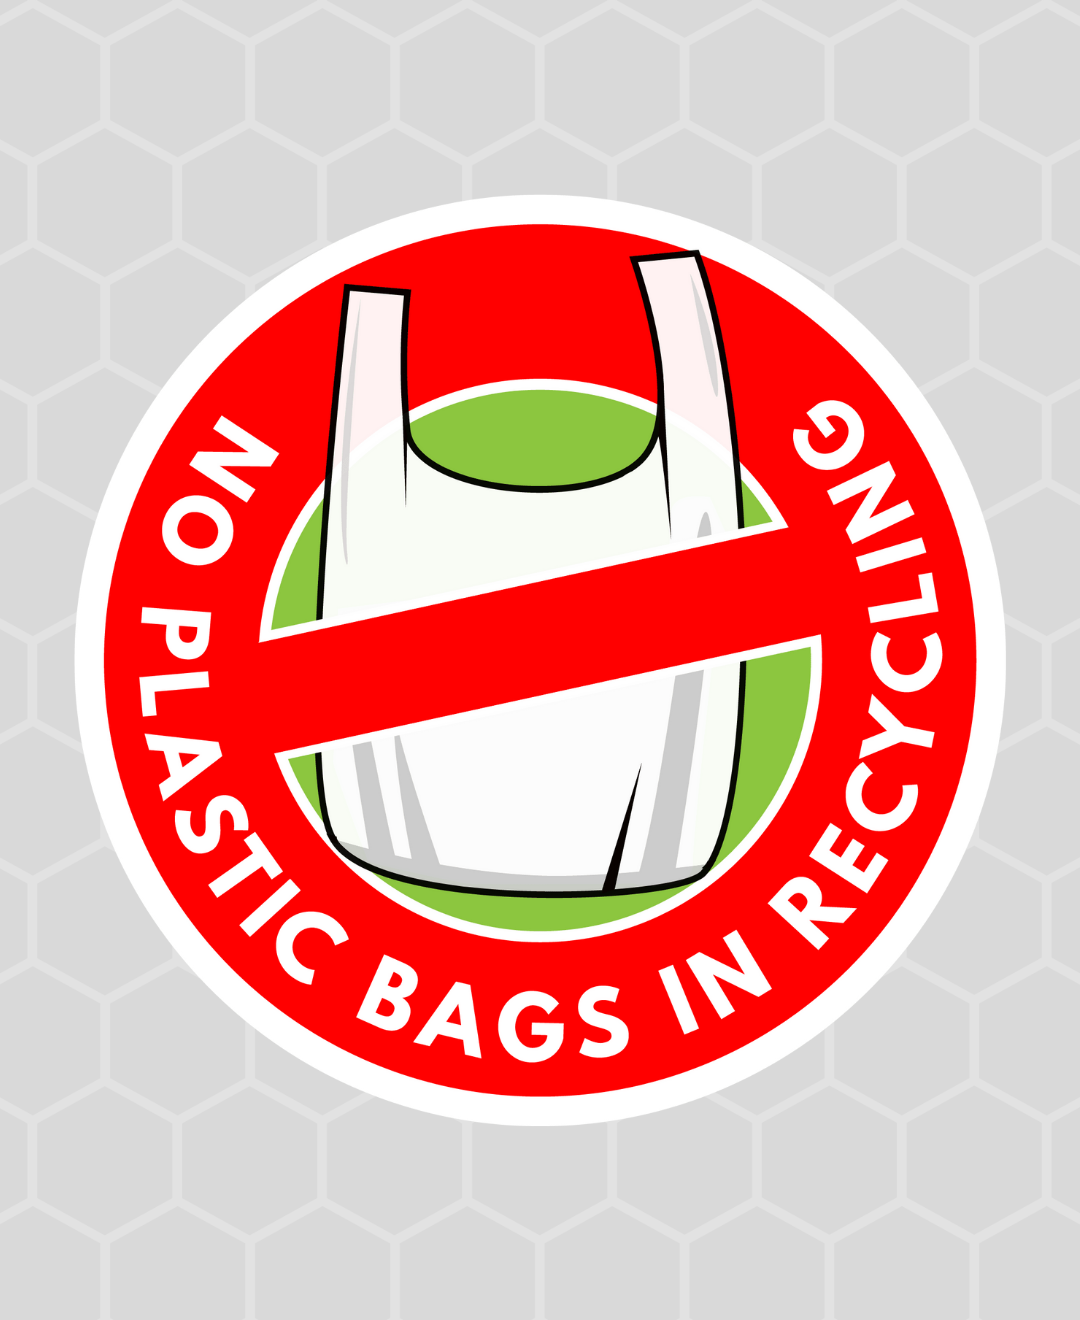 No Plastic Bags in Recycling!